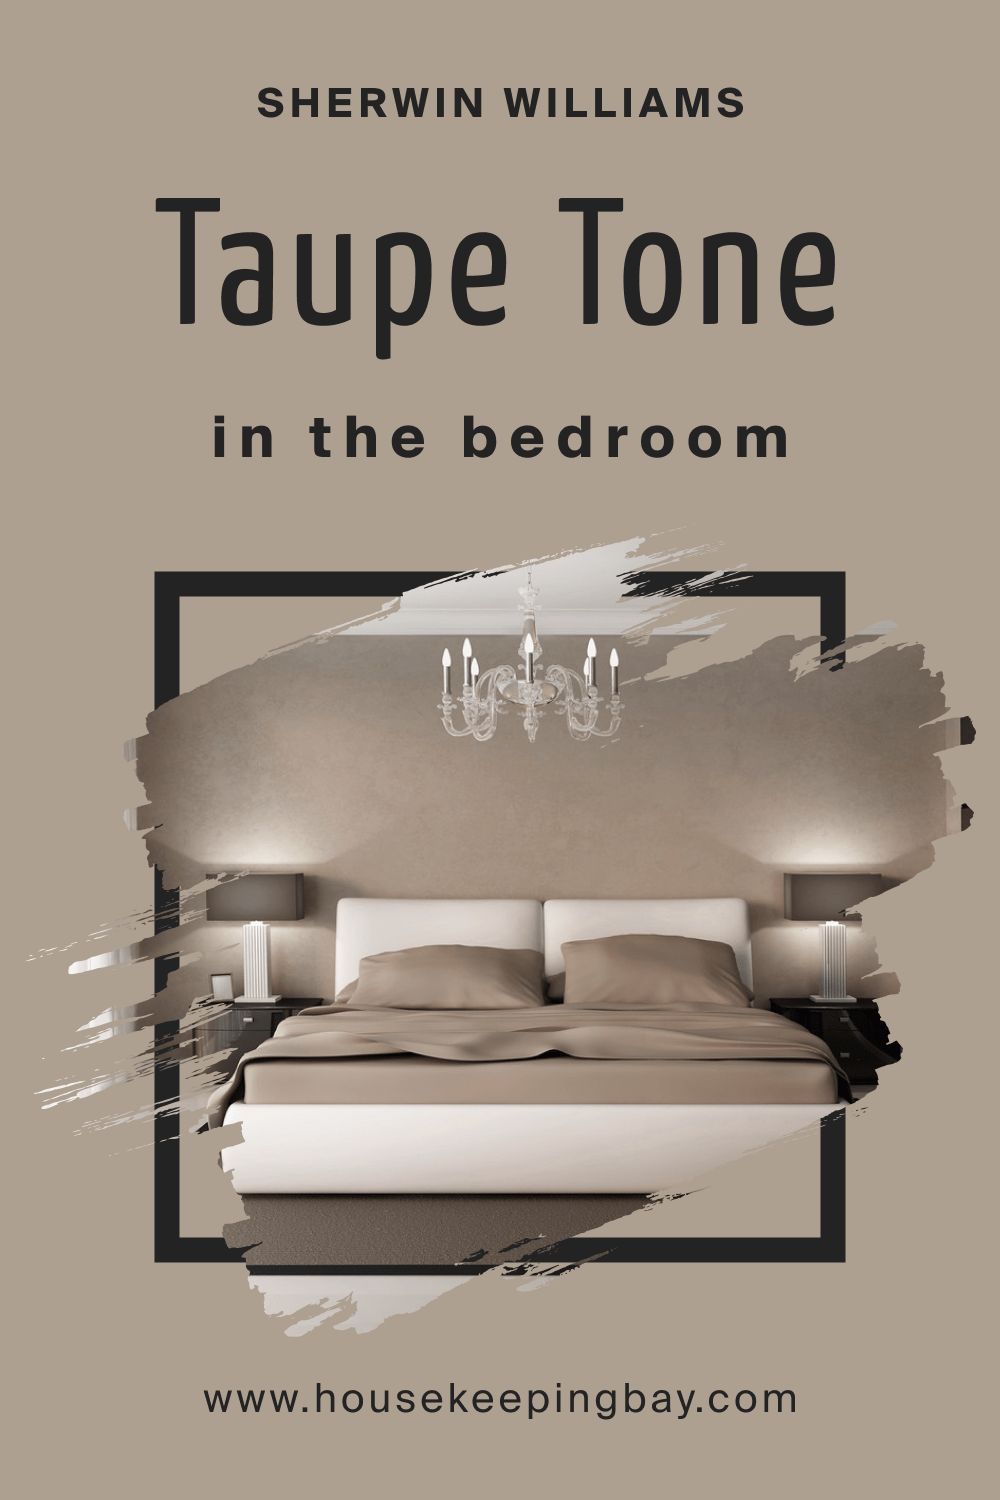 Sherwin Williams. Taupe Tone SW 7633 For the bedroom